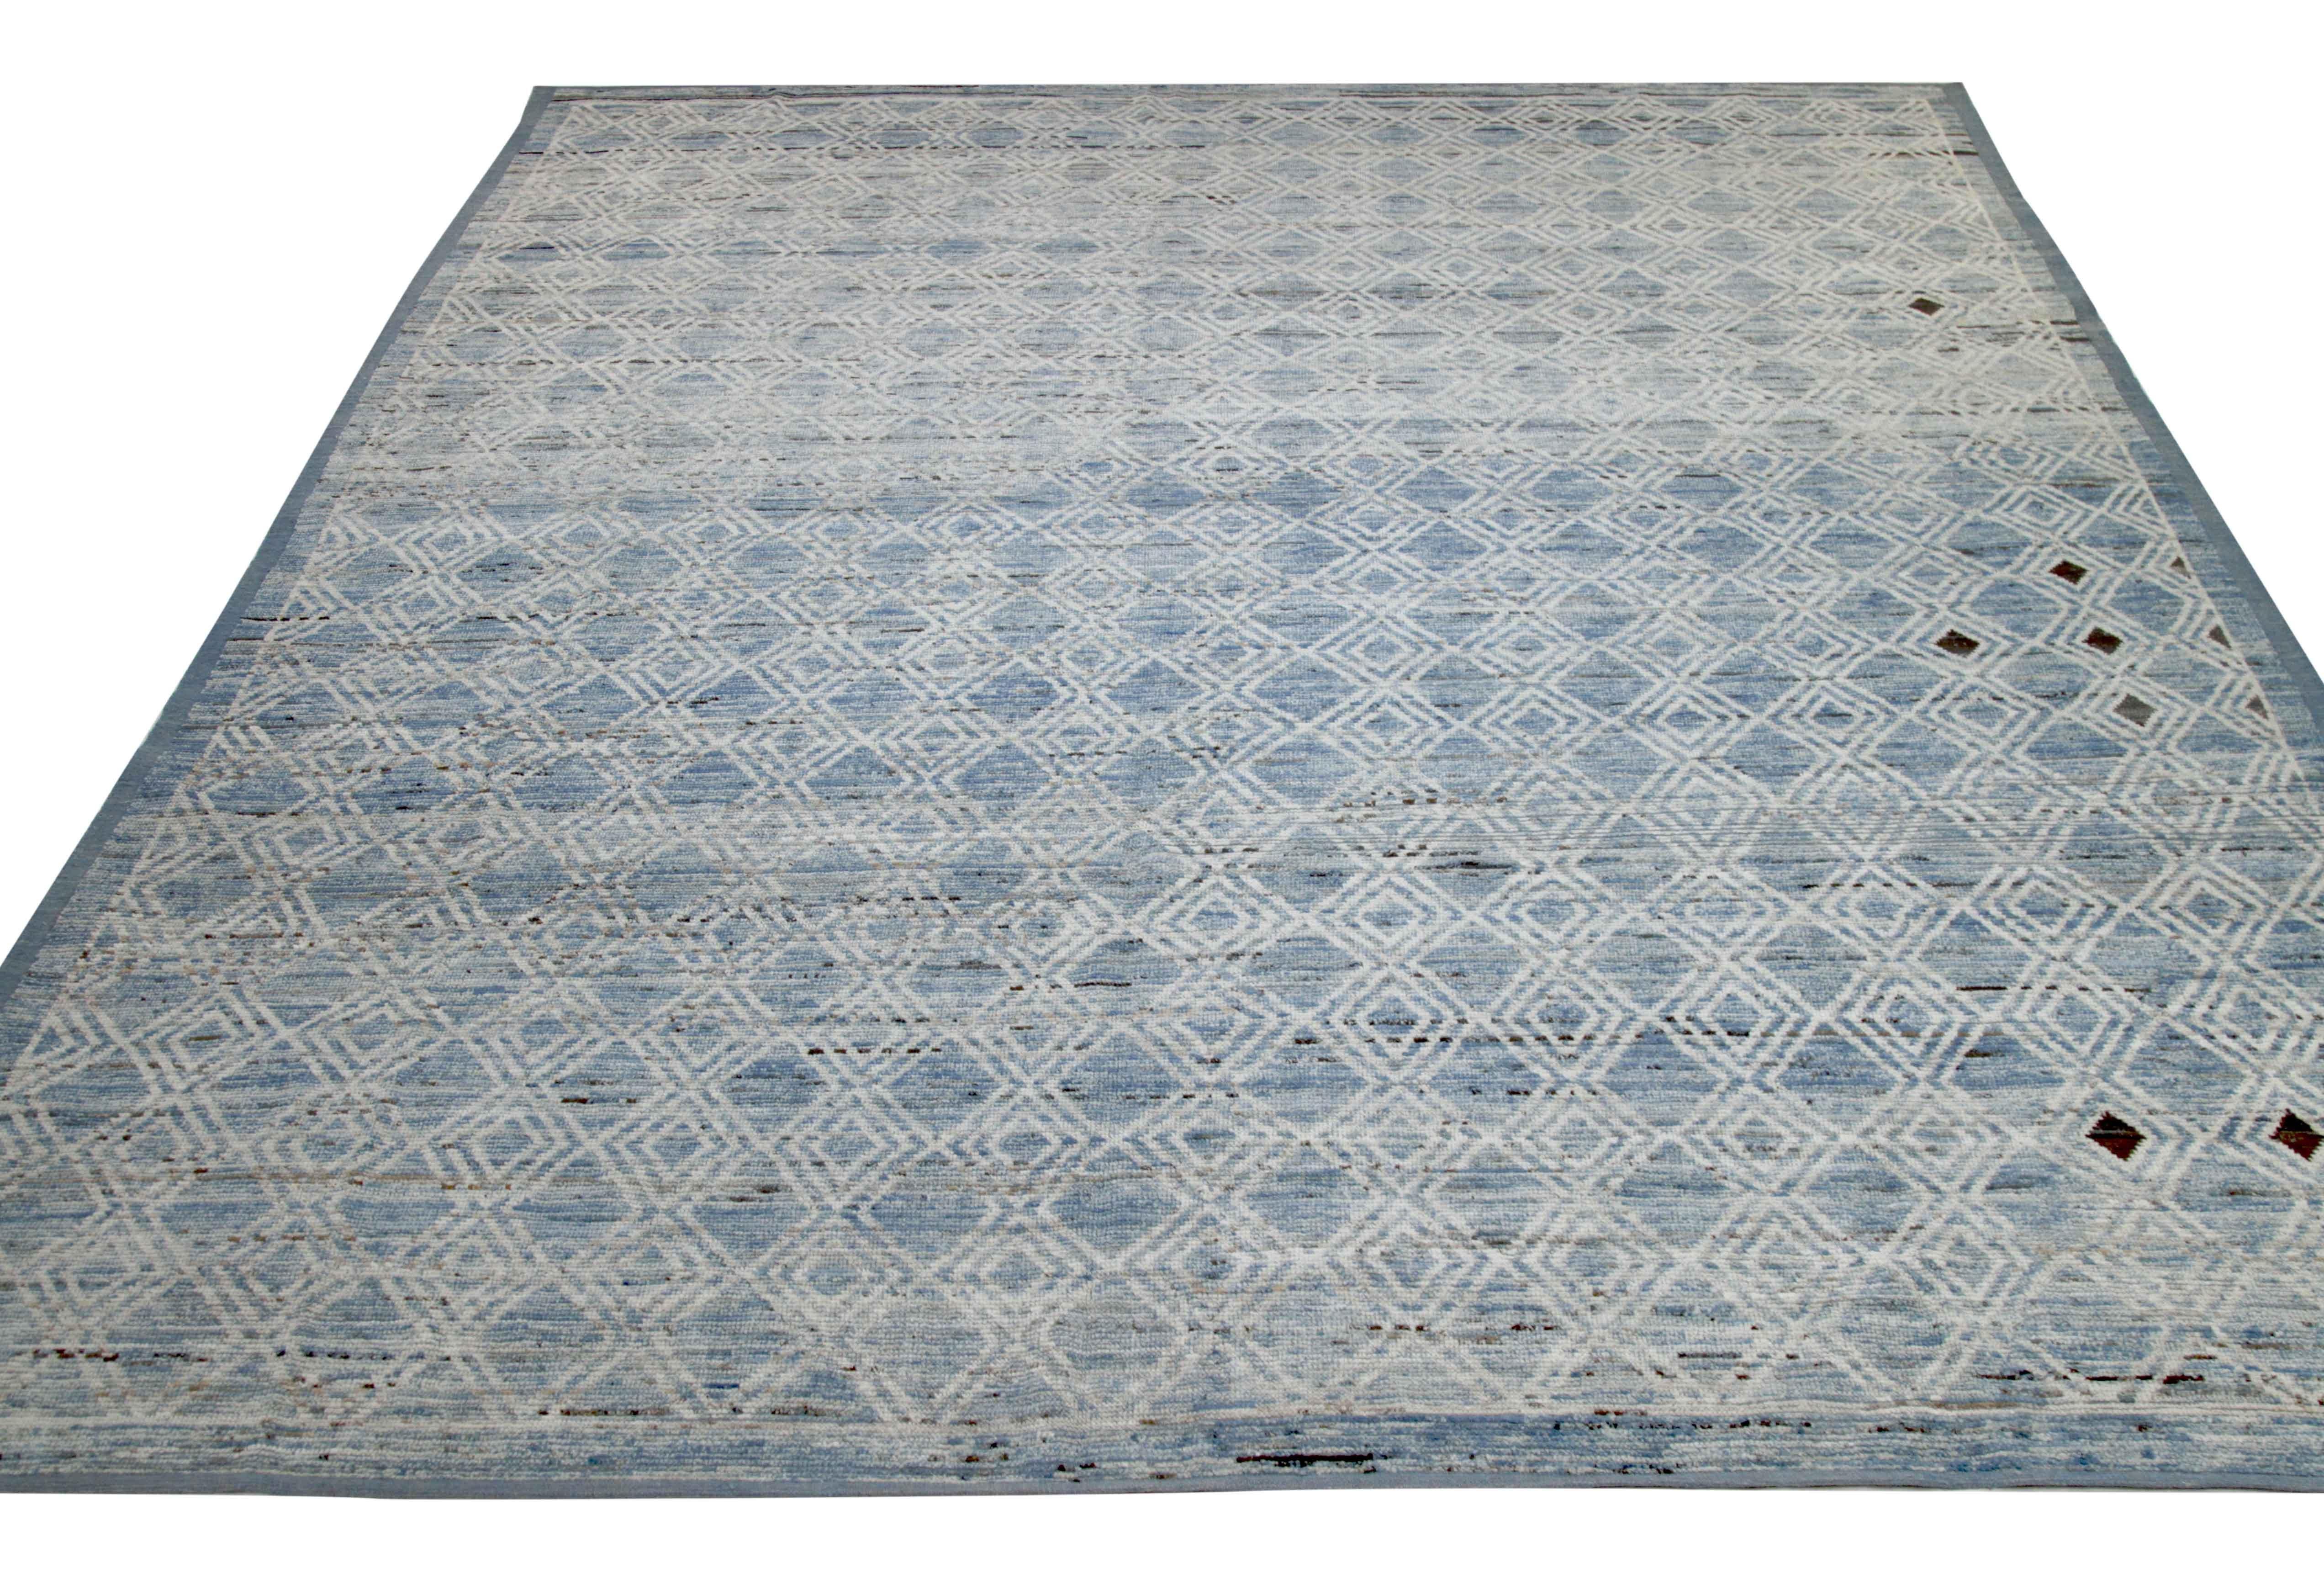 Modern Afghan rug handwoven from the finest sheep’s wool. It’s colored with all-natural vegetable dyes that are safe for humans and pets. This piece is a traditional Afghan weaving featuring a Moroccan inspired design. It’s highlighted by white and